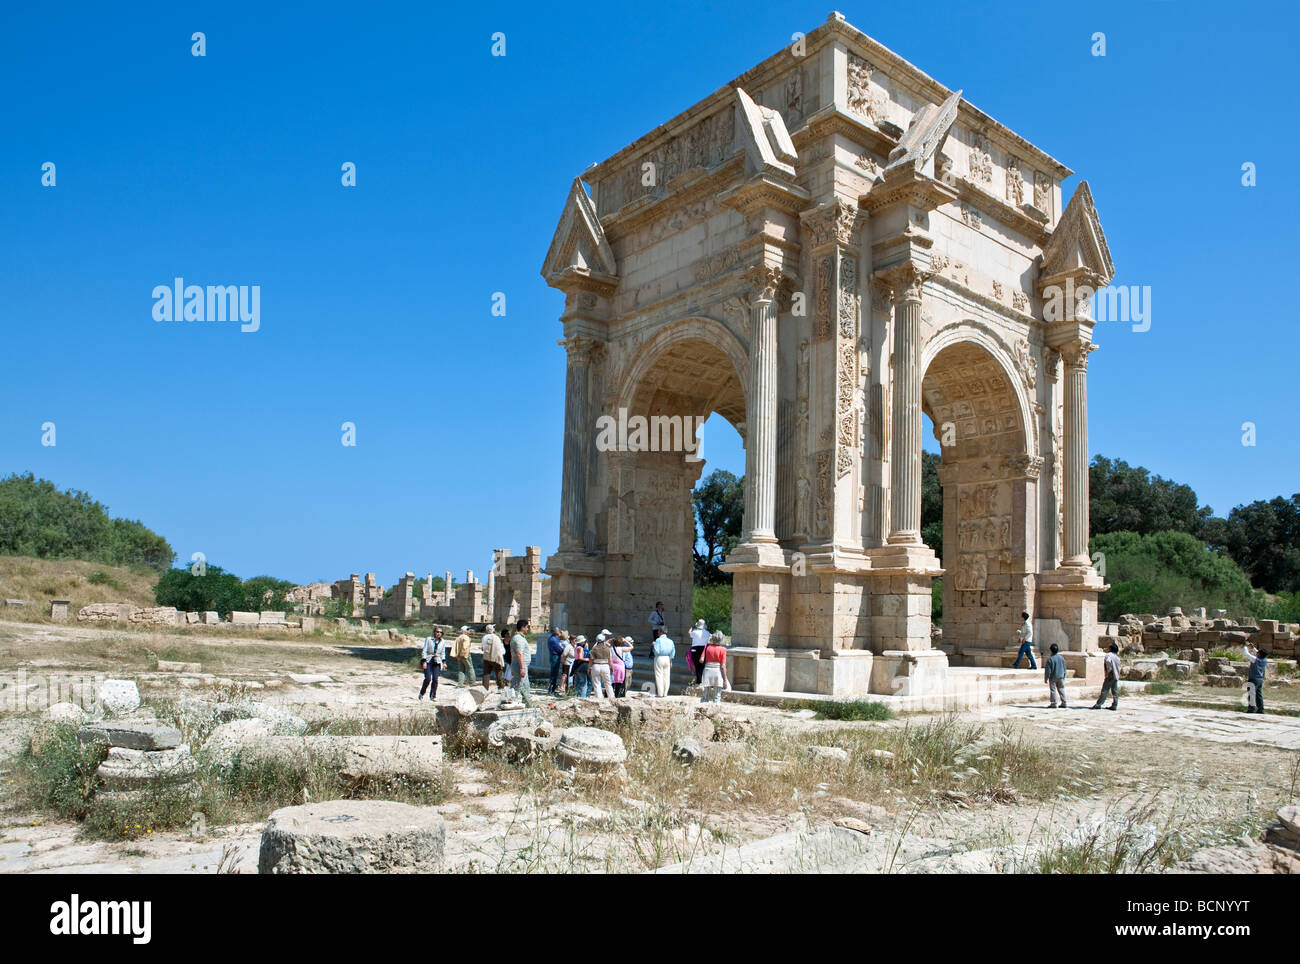 Libya archaeological site of Leptis Magna the Settimio Severo arch Stock Photo